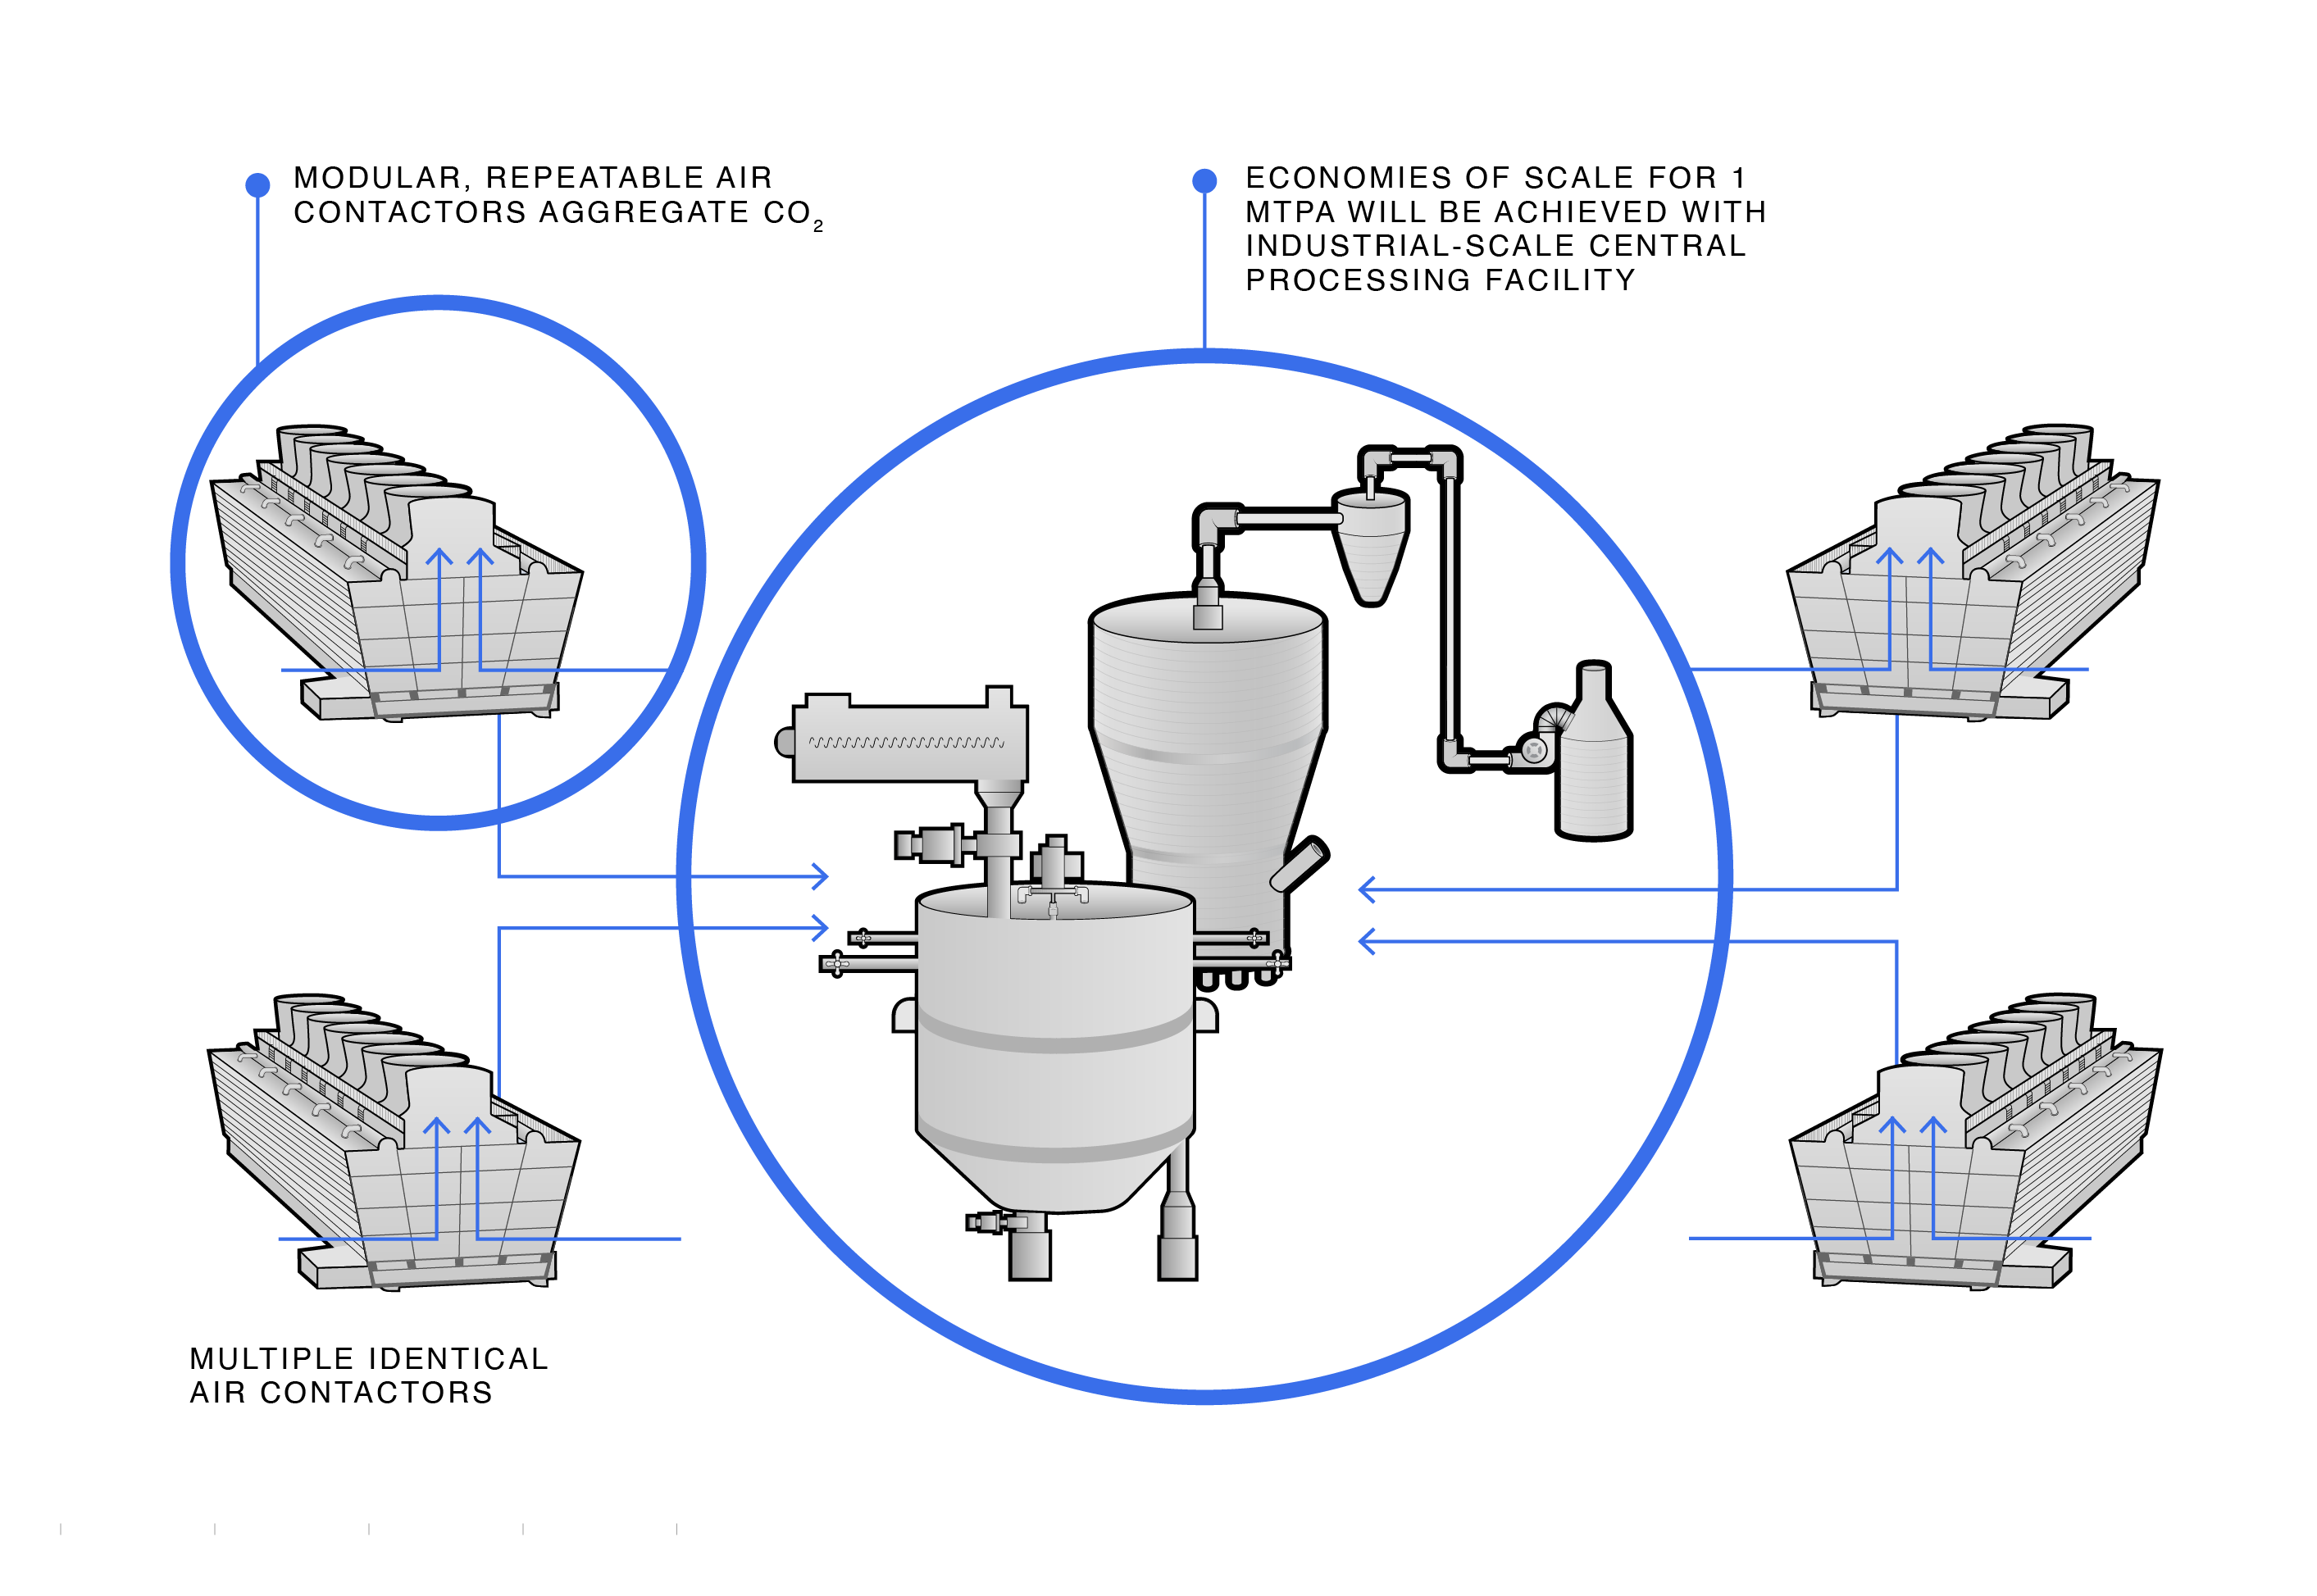 Diagram showing air contactors and central processing facility